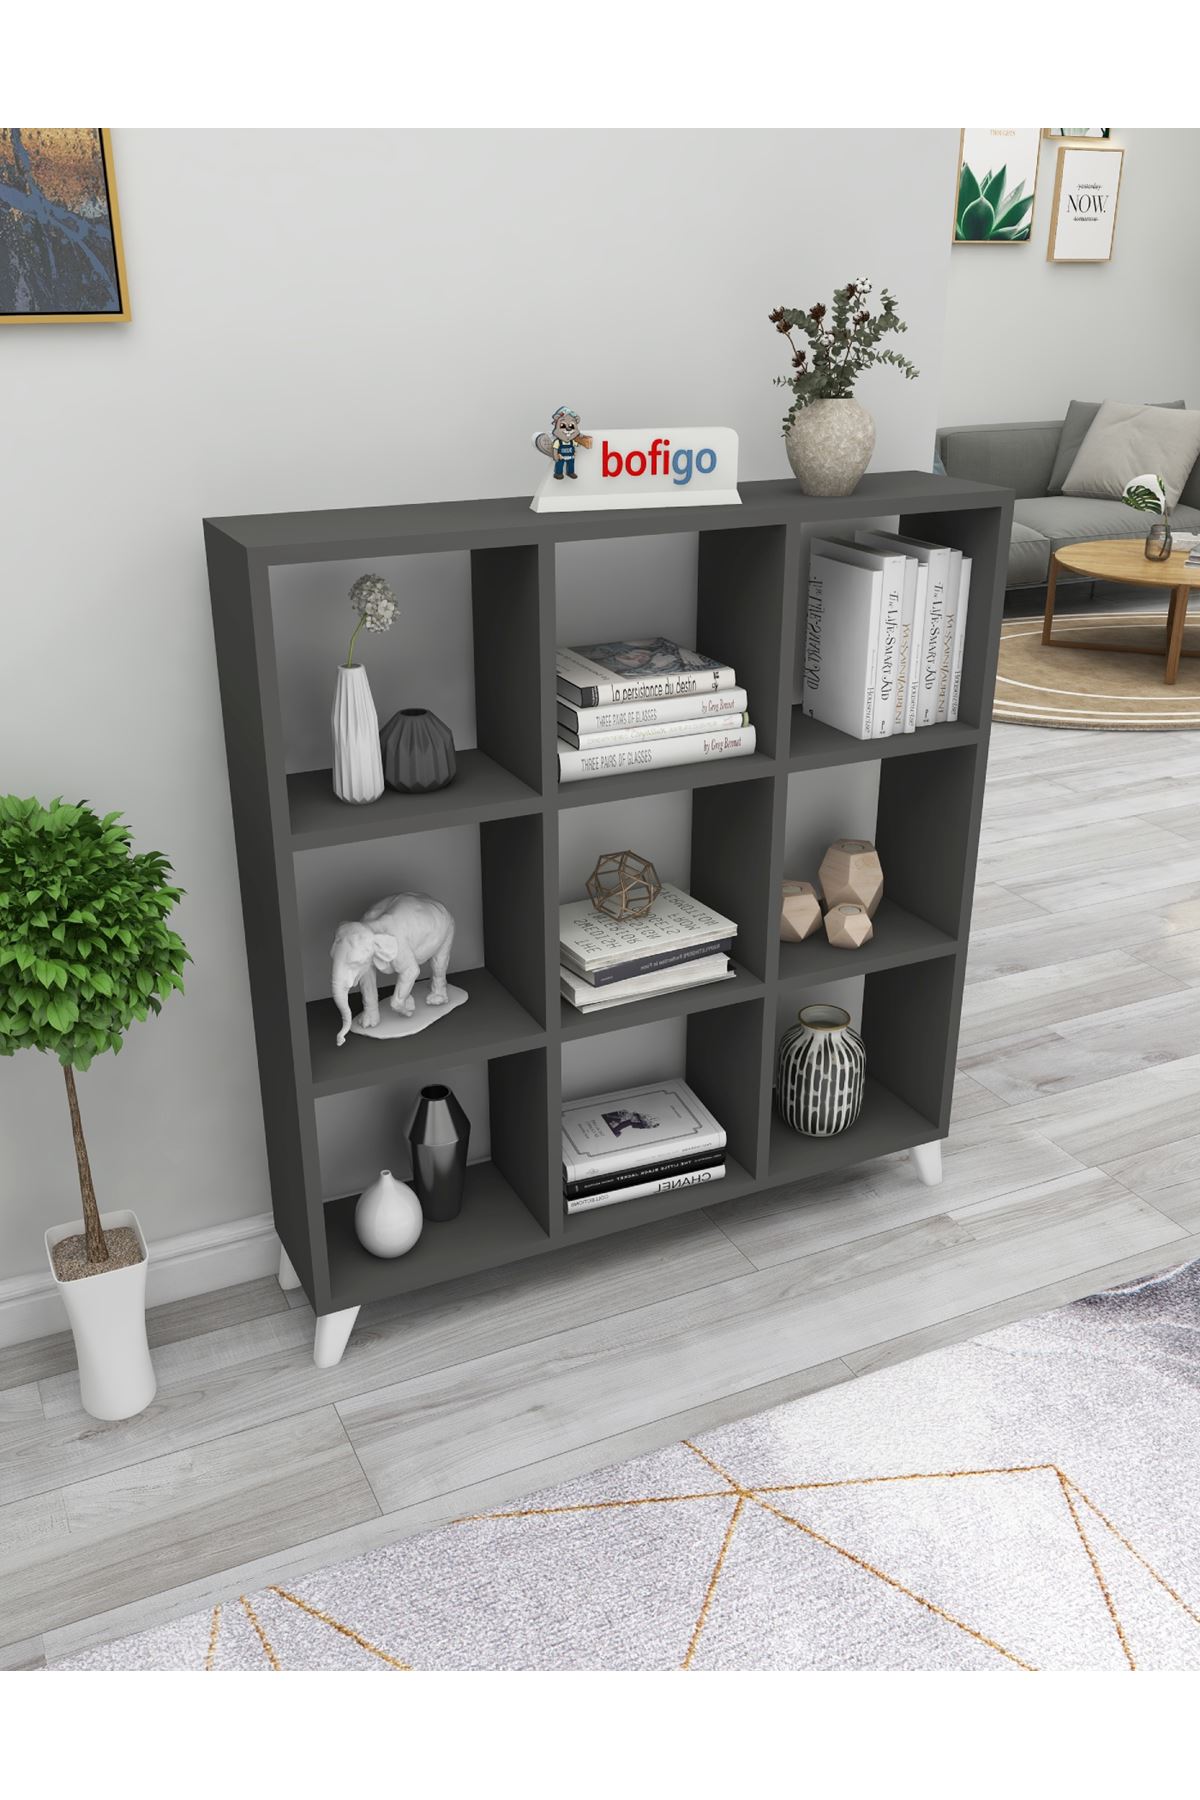 Bofigo Cube Bookshelf with 9 Sections and Shelves Square Bookcase Library Anthracite